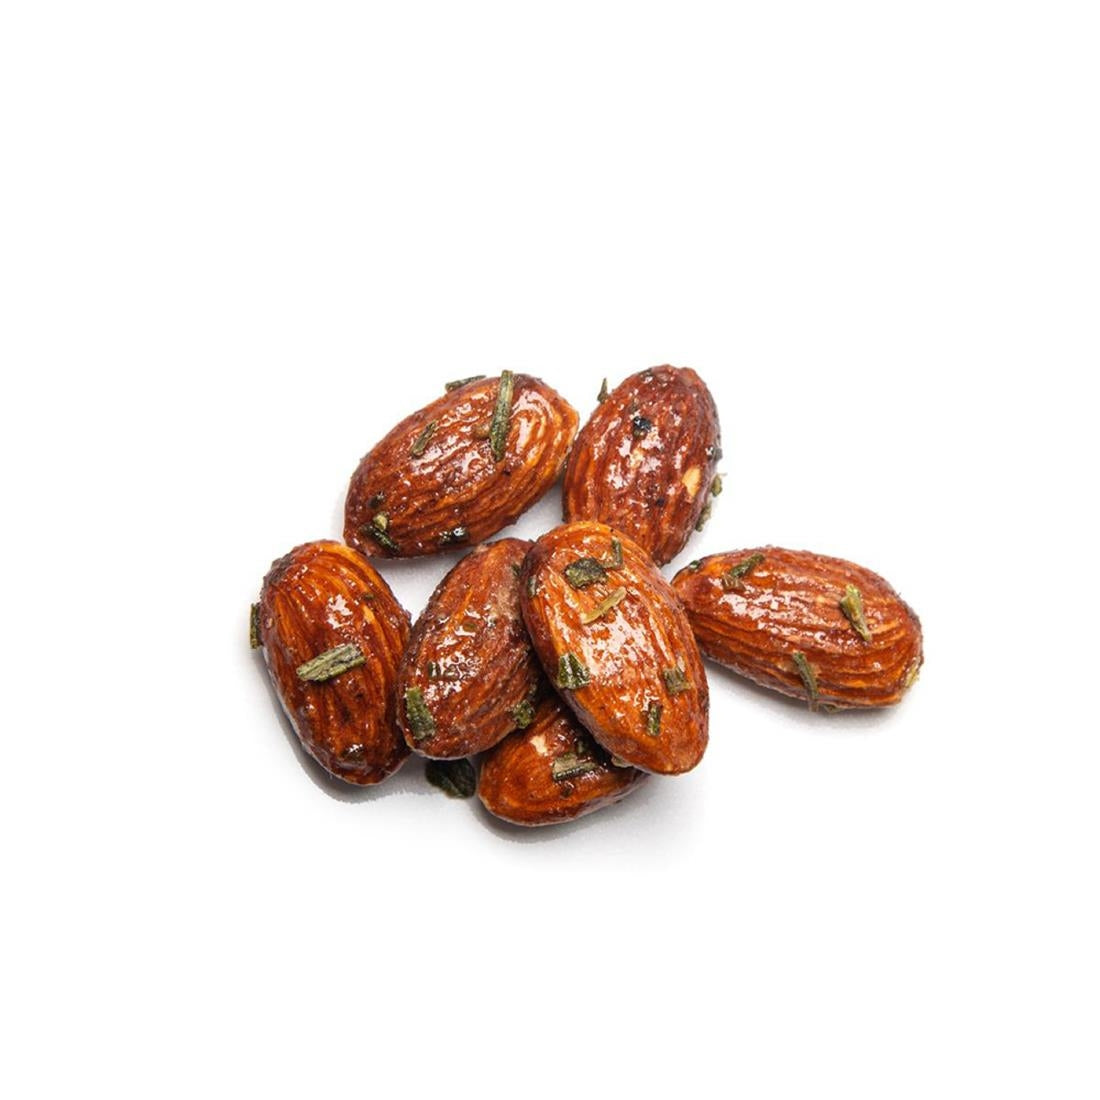 FU488 Mr Filbert's Foodservice Bag French Rosemary Almonds 2.8kg